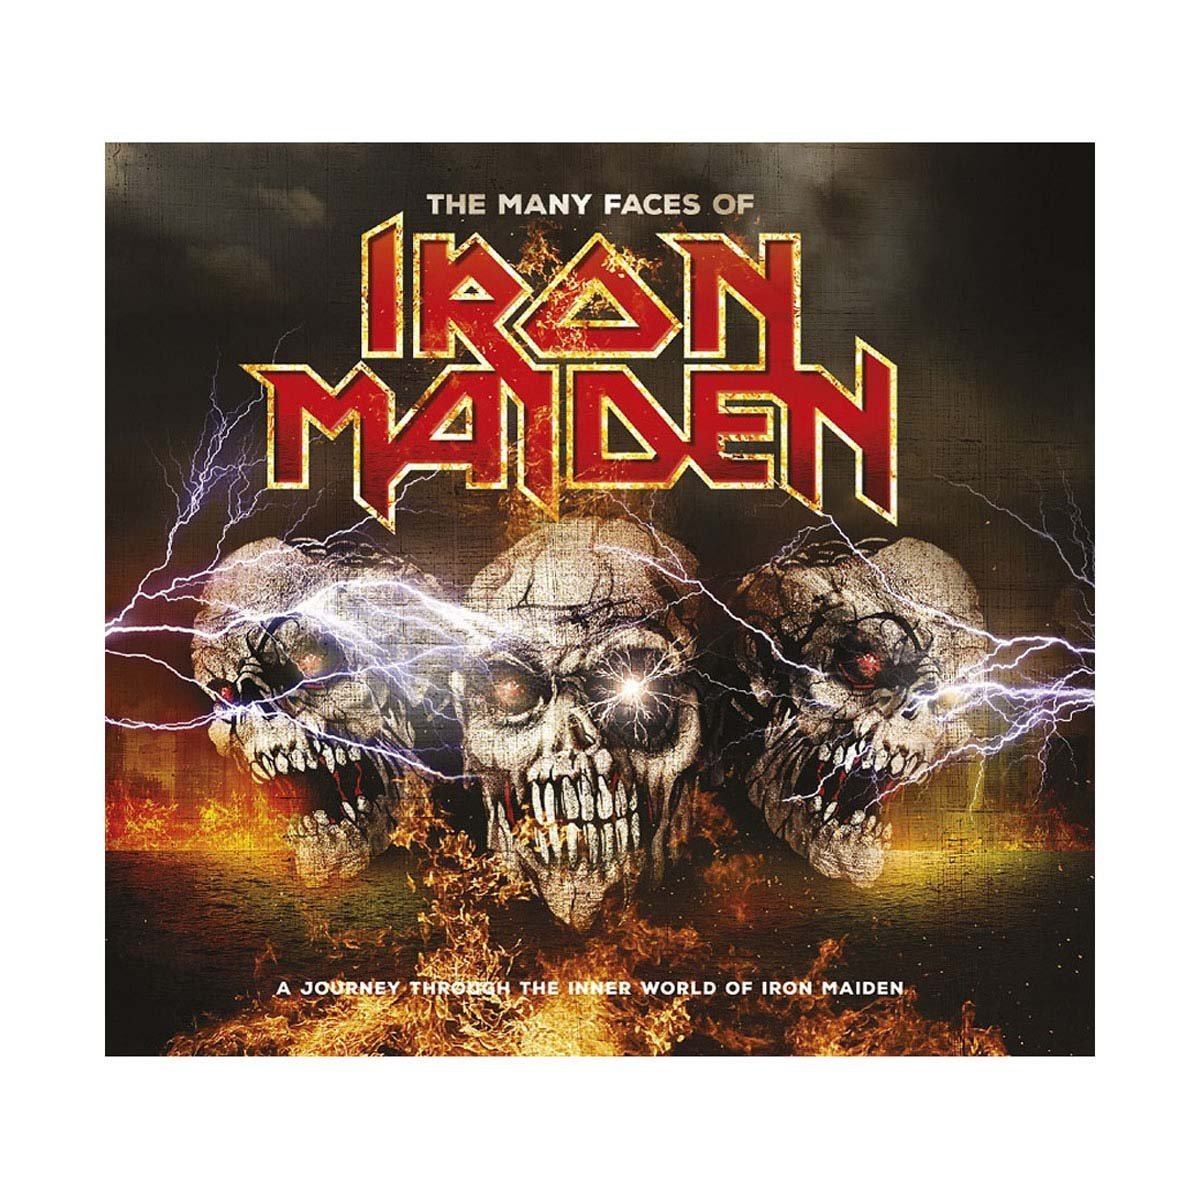 3Cds Varios The Many Faces Of Iron Maden